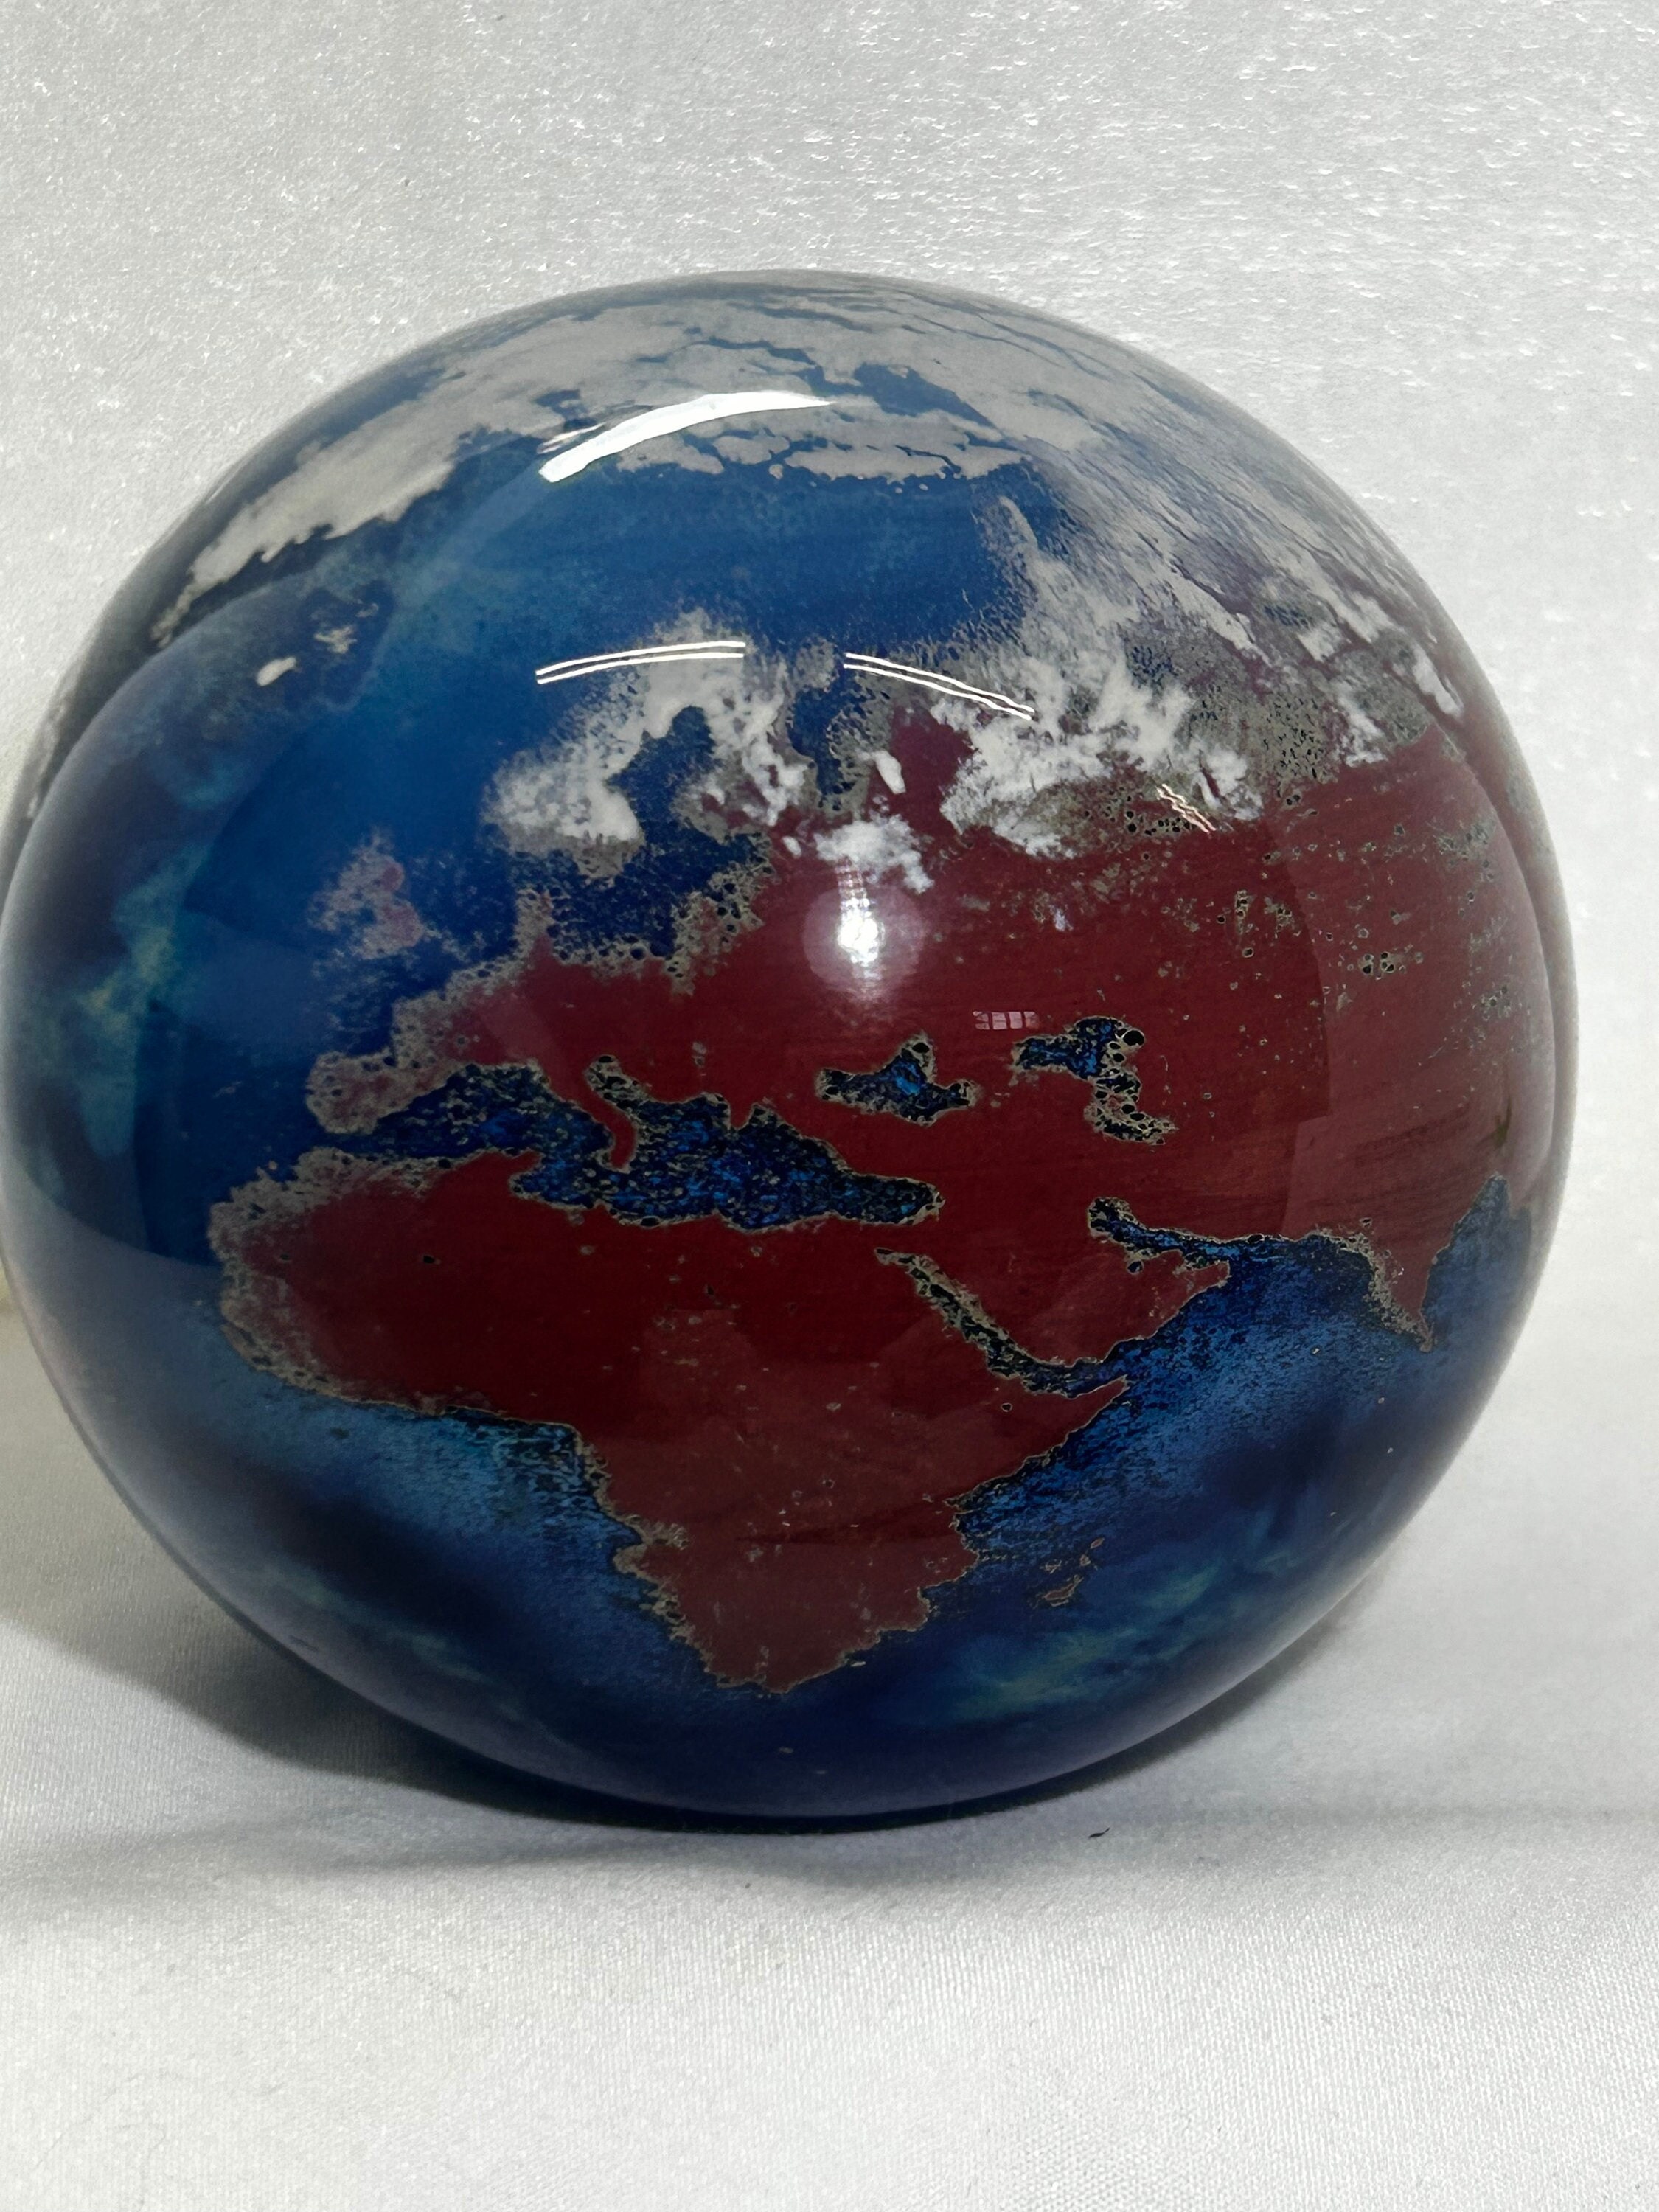 100mm Genuine Crystal World Globe Earth Sphere Etched Frosted Glass Ball